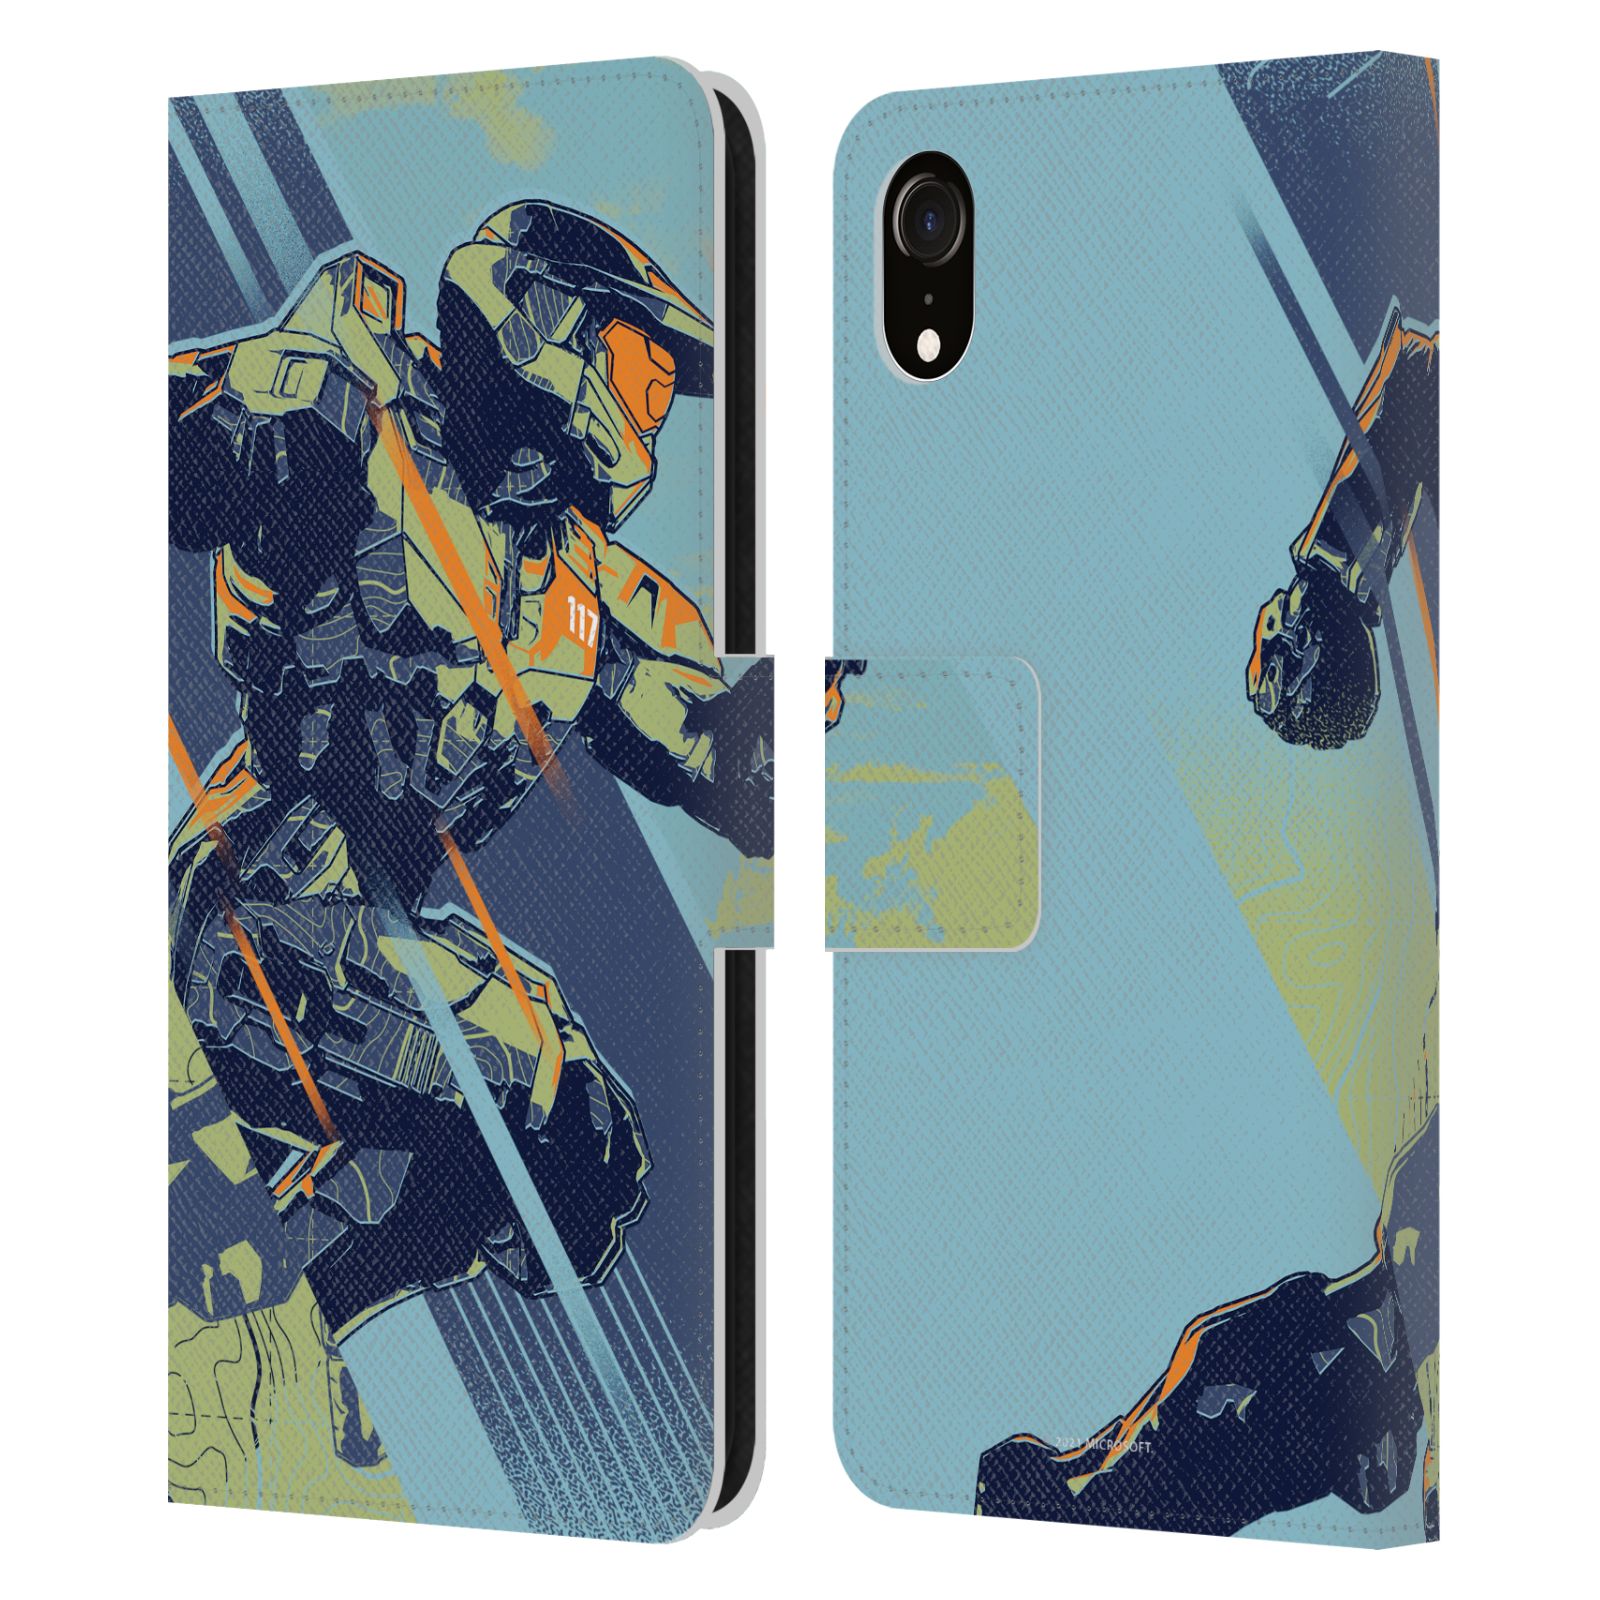 Pouzdro na mobil Apple Iphone XR - HEAD CASE - Halo Infinite - Pohled z boku